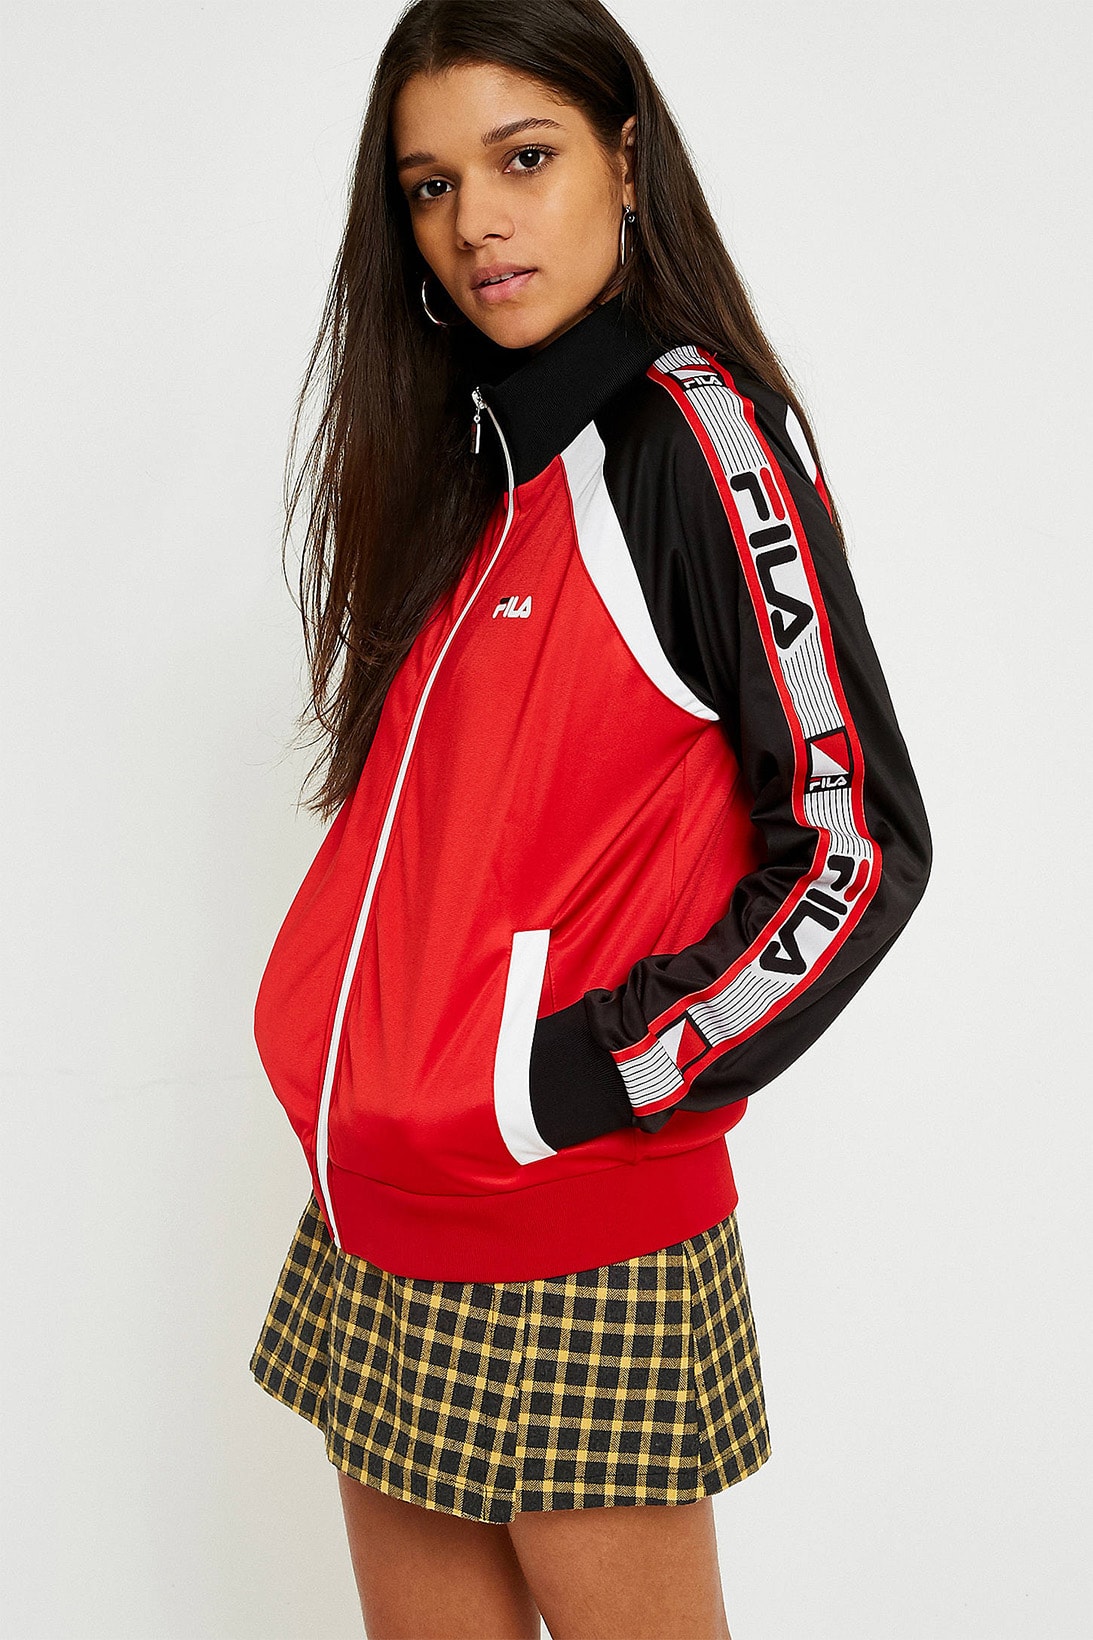 FILA womens athletic track jacket colorblocked 90s retro vintage sportswear red black white logo urban outfitters